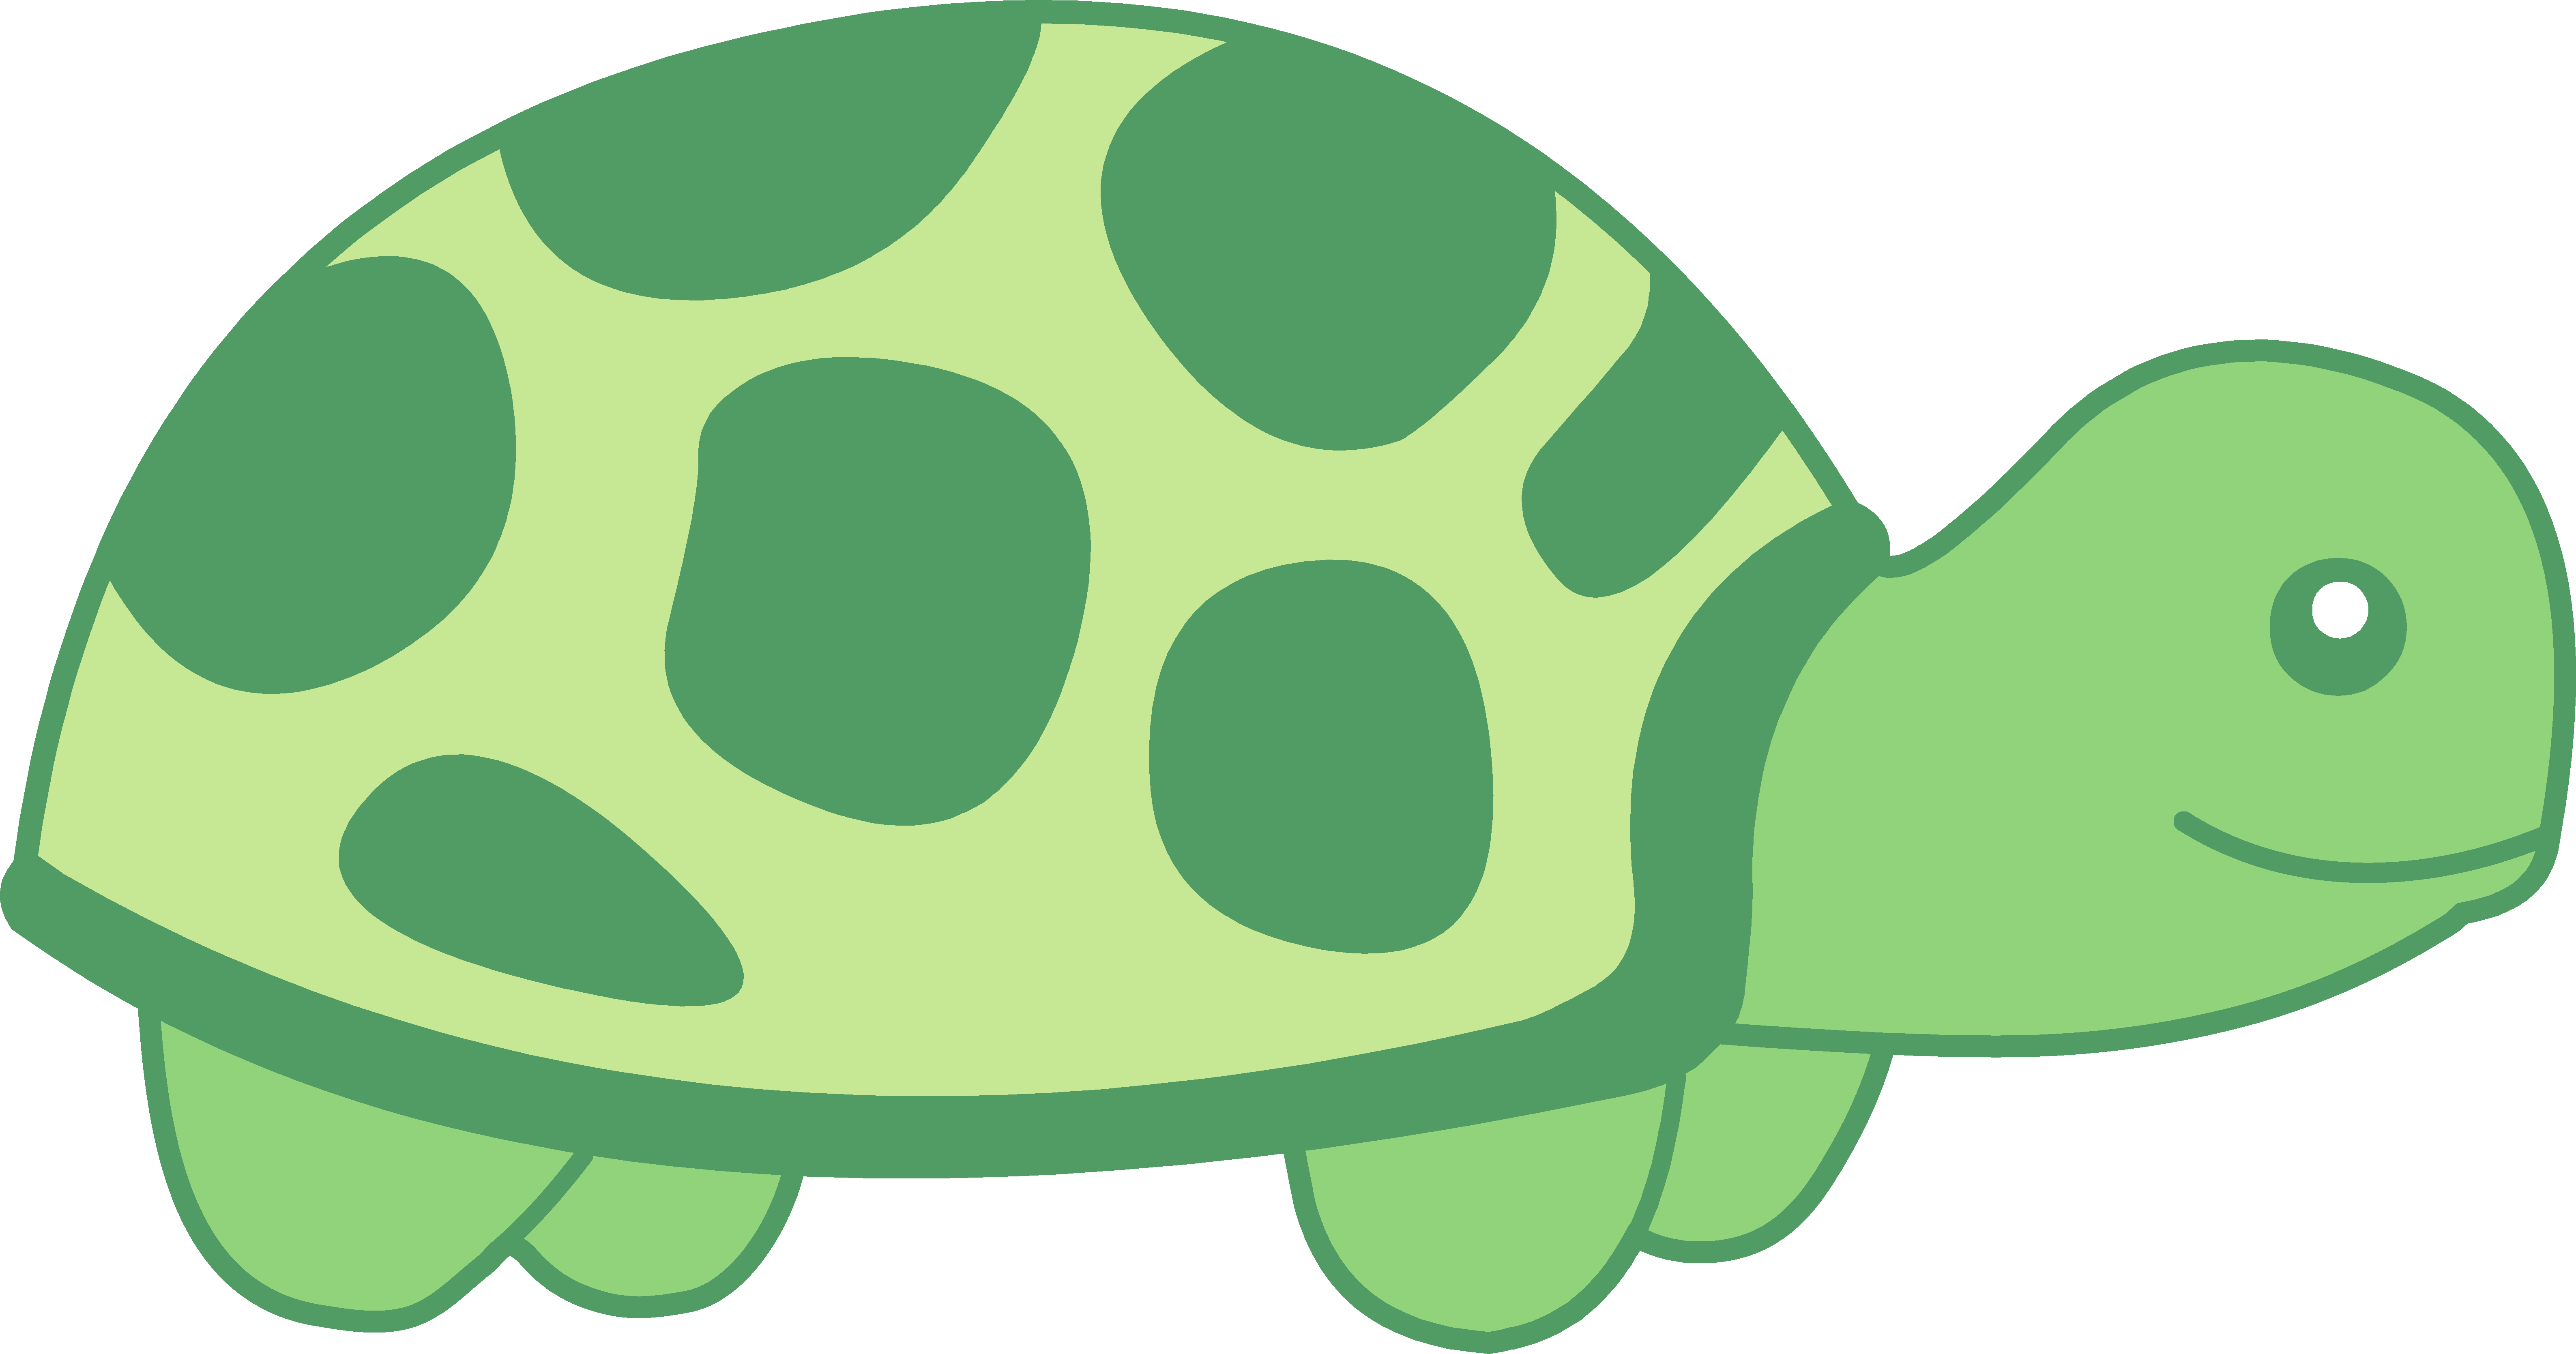 Turtle Clip Art Black And White   Clipart Panda   Free Clipart Images